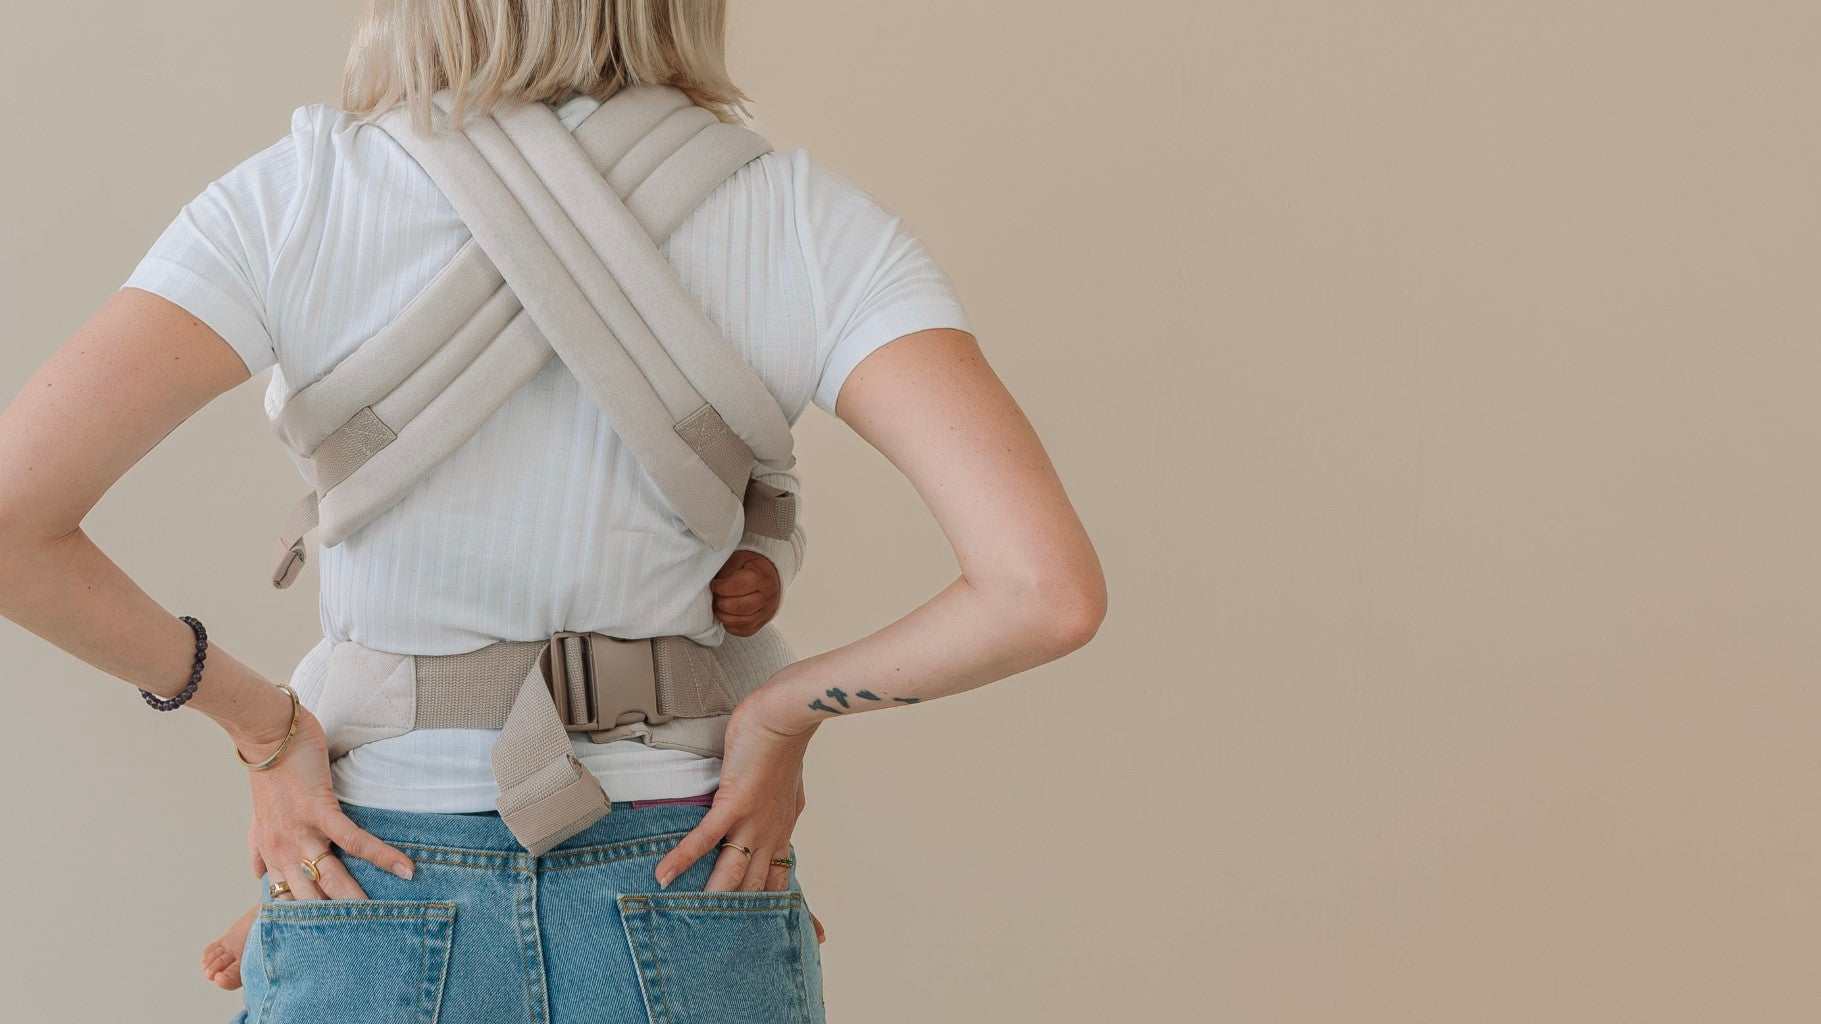 How to Wear our Baby Carrier